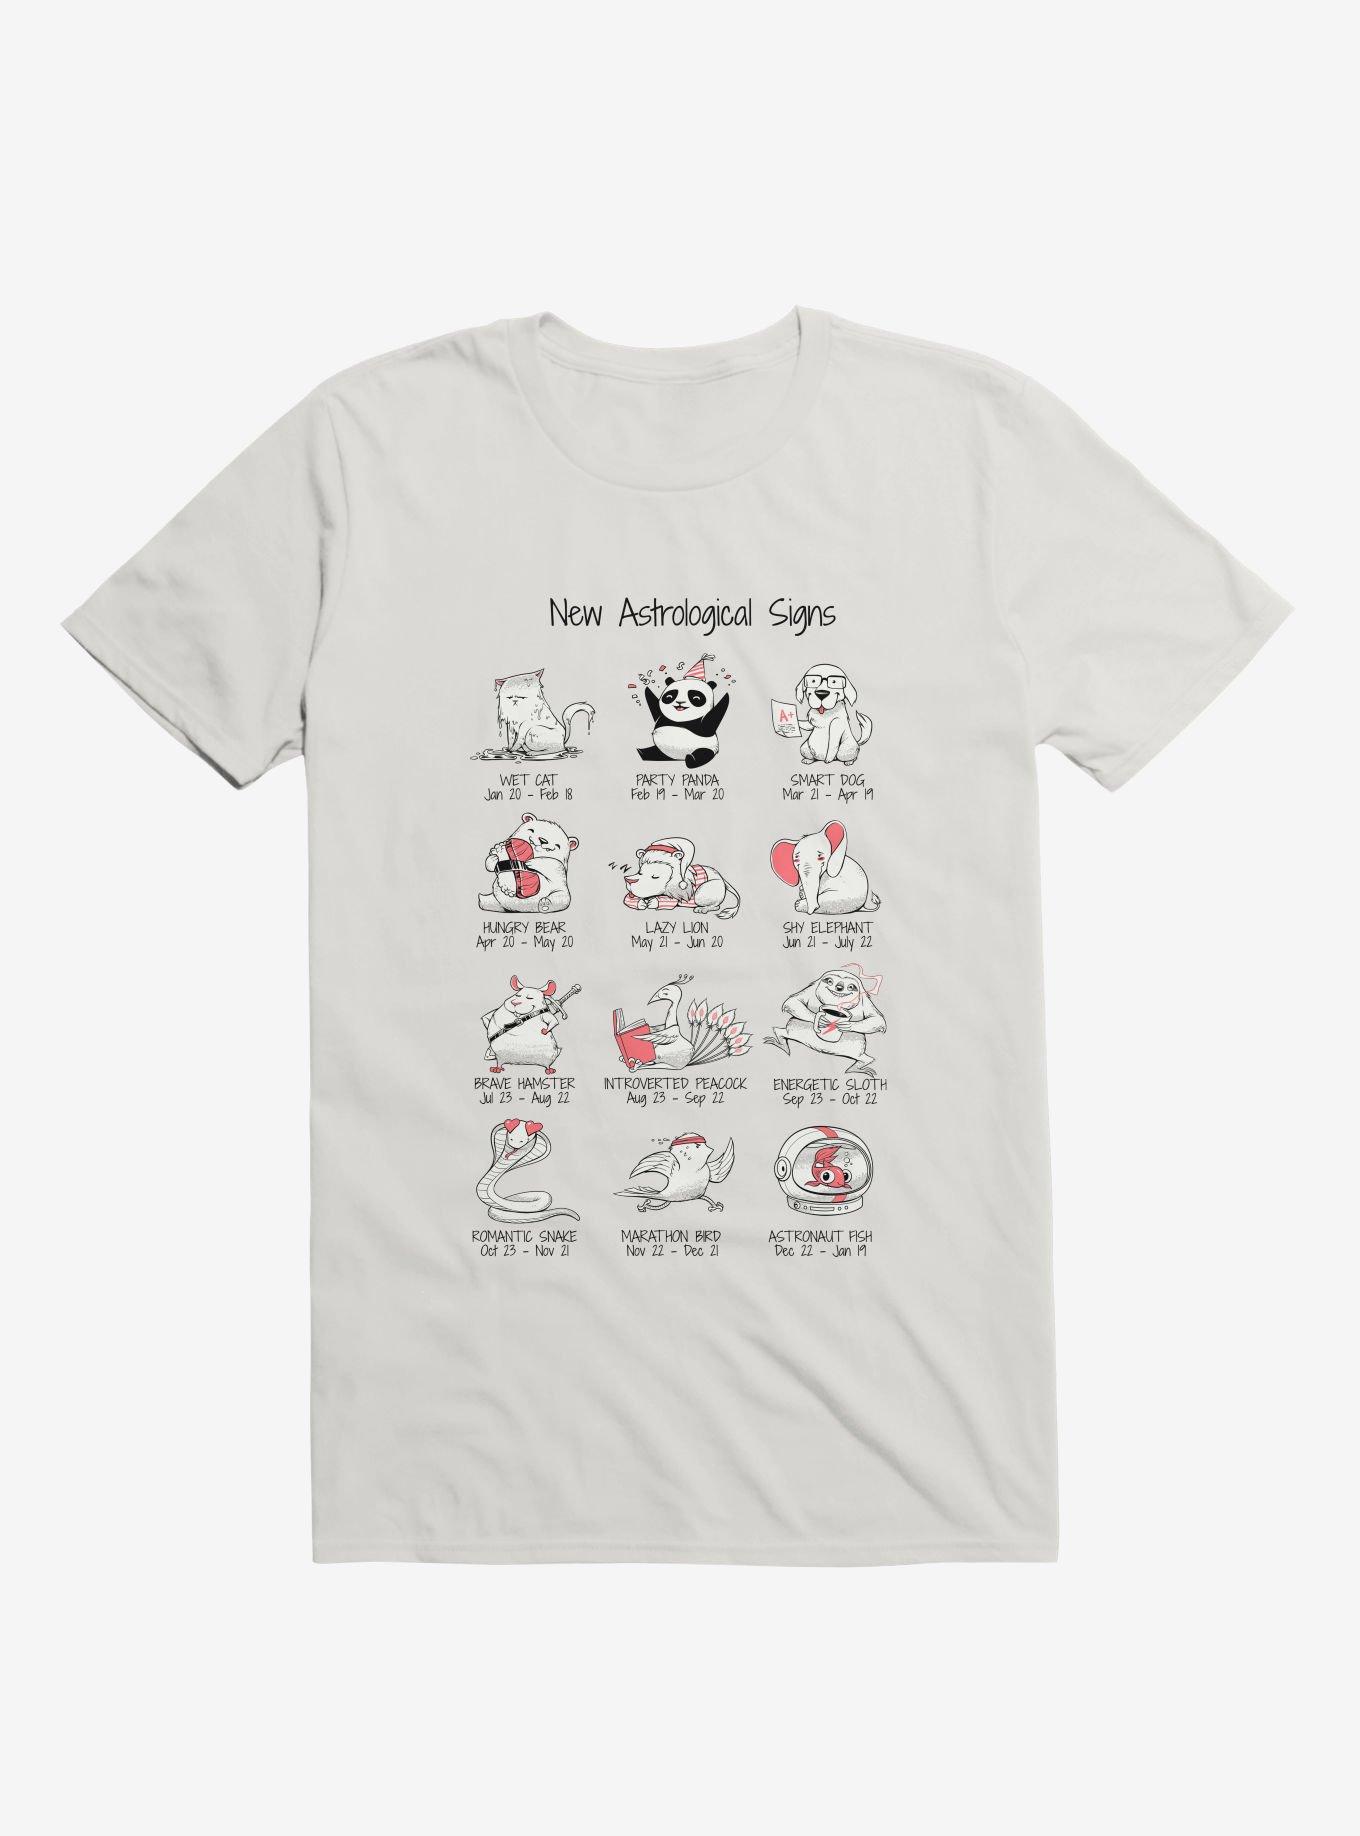 New Astrological Signs T-Shirt, WHITE, hi-res